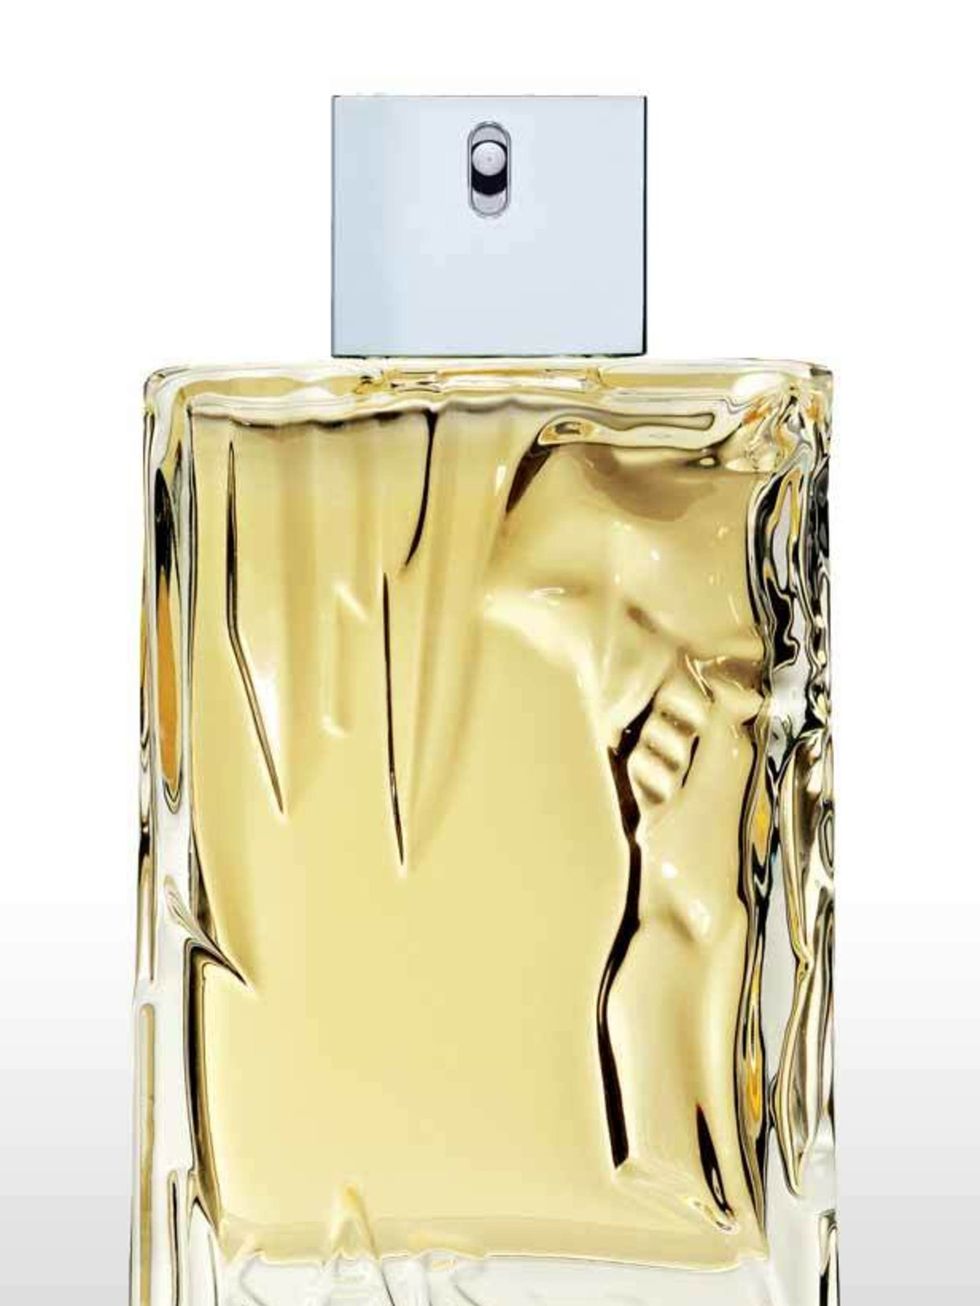 <p>I love wearing men's fragrances sometimes as there is a cologney zestiness to them. This new scent from Sisley has the perfect balance between powdery and green.</p><p>Sisley Eau d'Iklar, £57.70 (available September)</p>